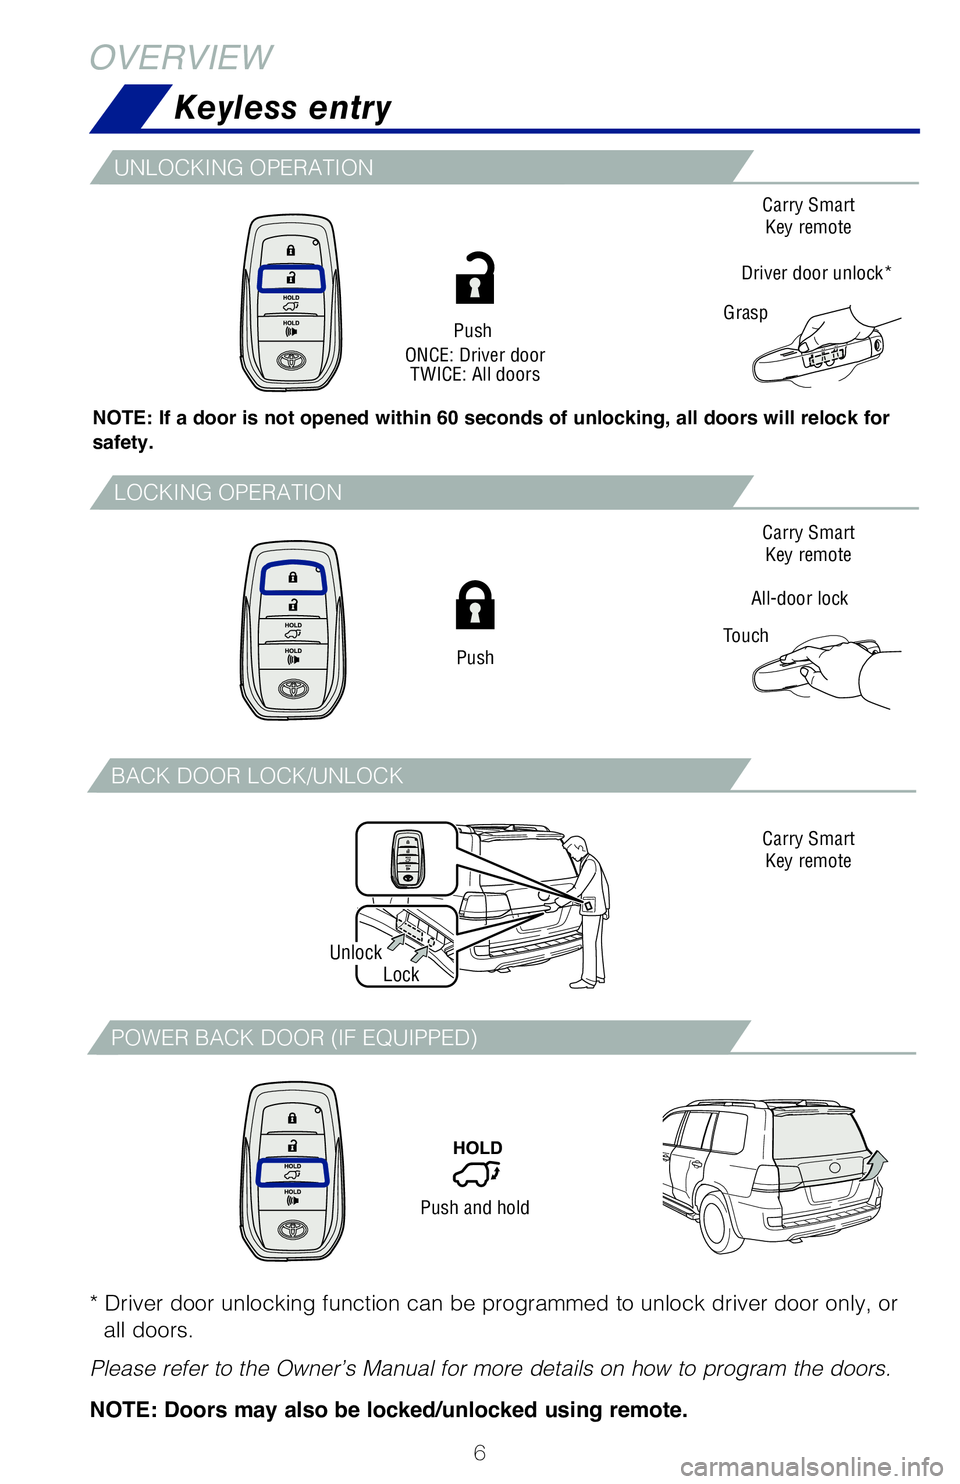 TOYOTA LAND CRUISER 2021  Owners Manual (in English) 6
Keyless entry
OVERVIEW
NOTE: If a door is not opened within 60 seconds of unlocking, all doors will relock for 
safety.
Push
ONCE: Driver door TWICE: All doors
All-door lock Carry Smart 
Key remote
